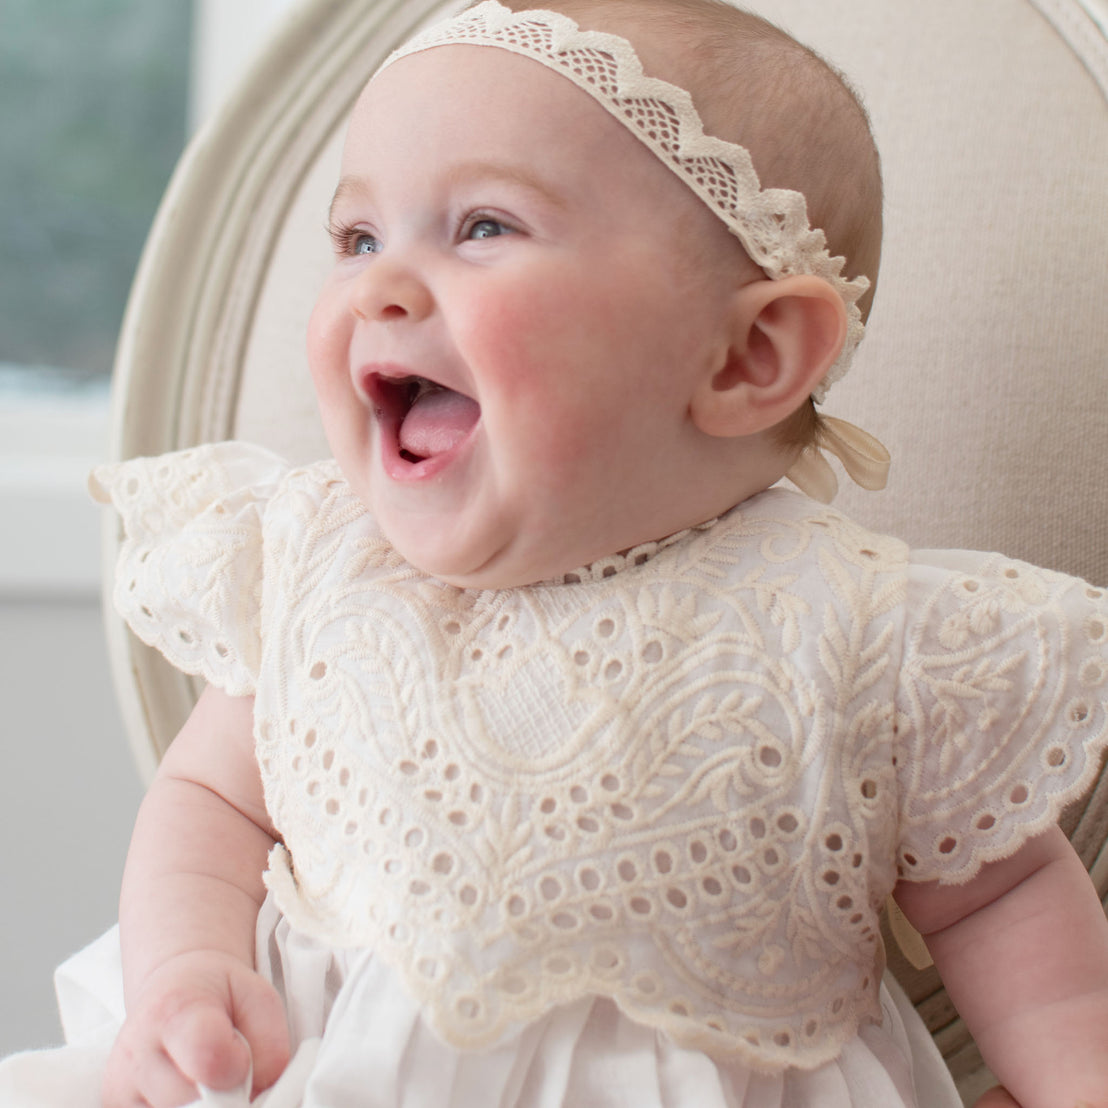 Baby laughing and wearing the Ingrid Tiered Gown and Headband 